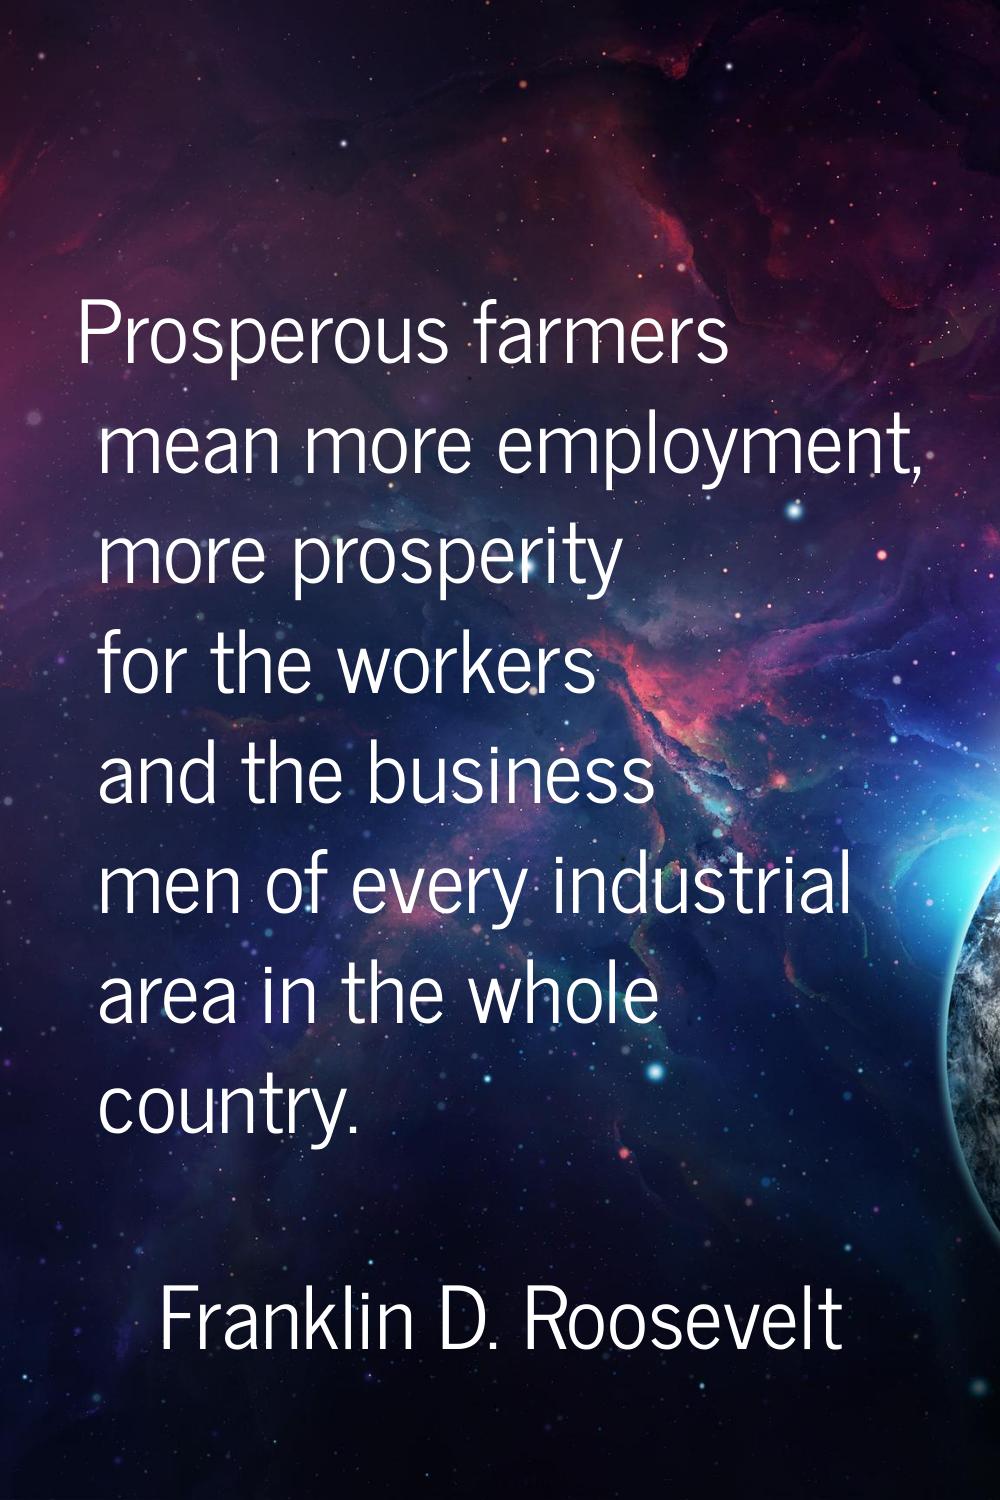 Prosperous farmers mean more employment, more prosperity for the workers and the business men of ev